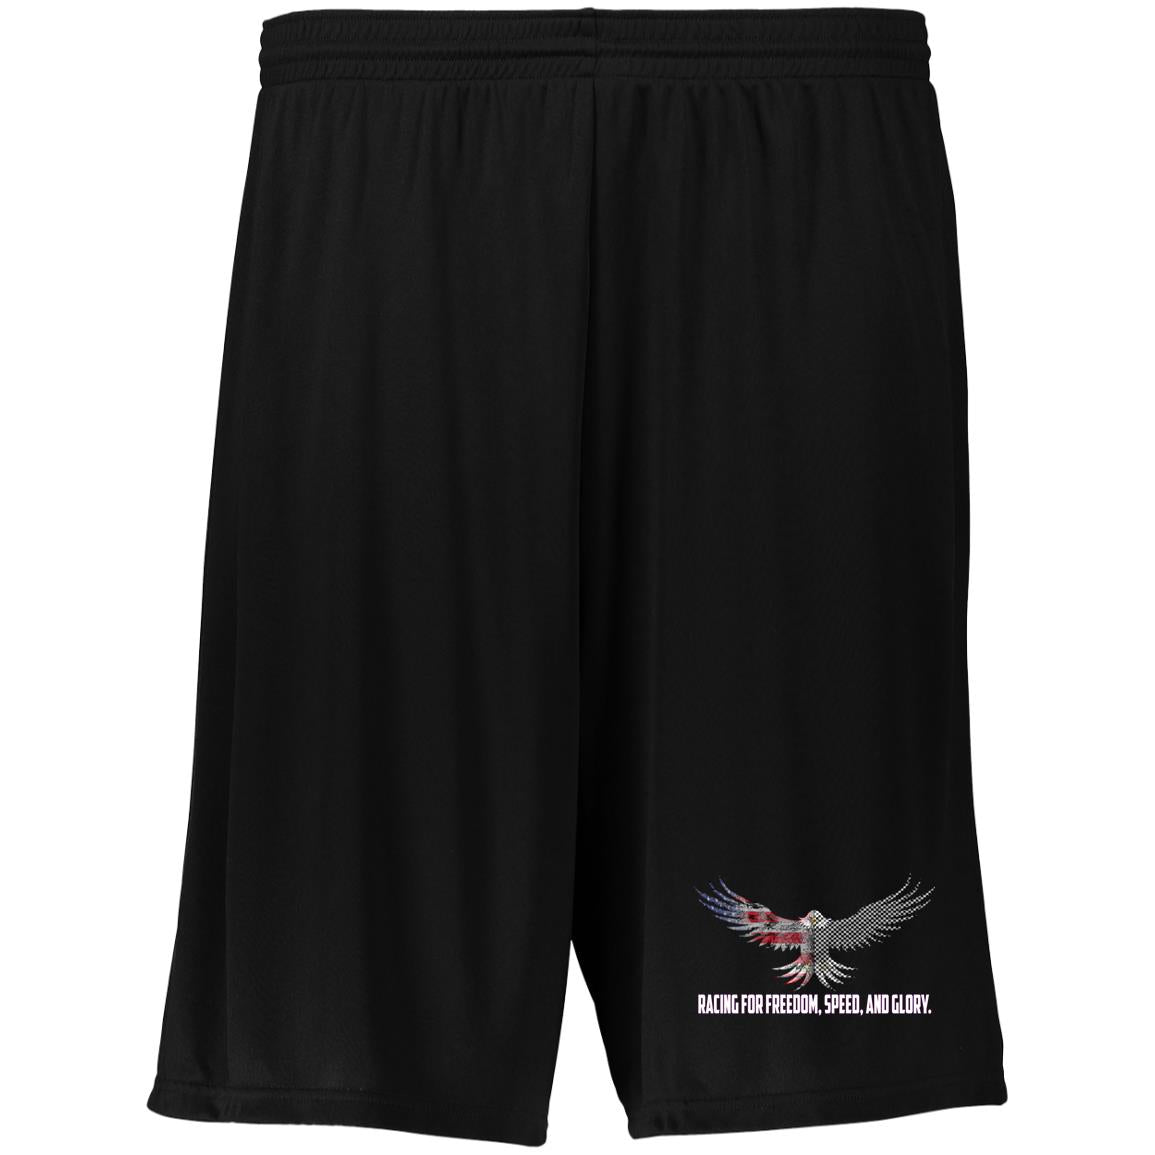 Racing For Freedom, Speed, And Glory Moisture-Wicking 9 inch Inseam Training Shorts